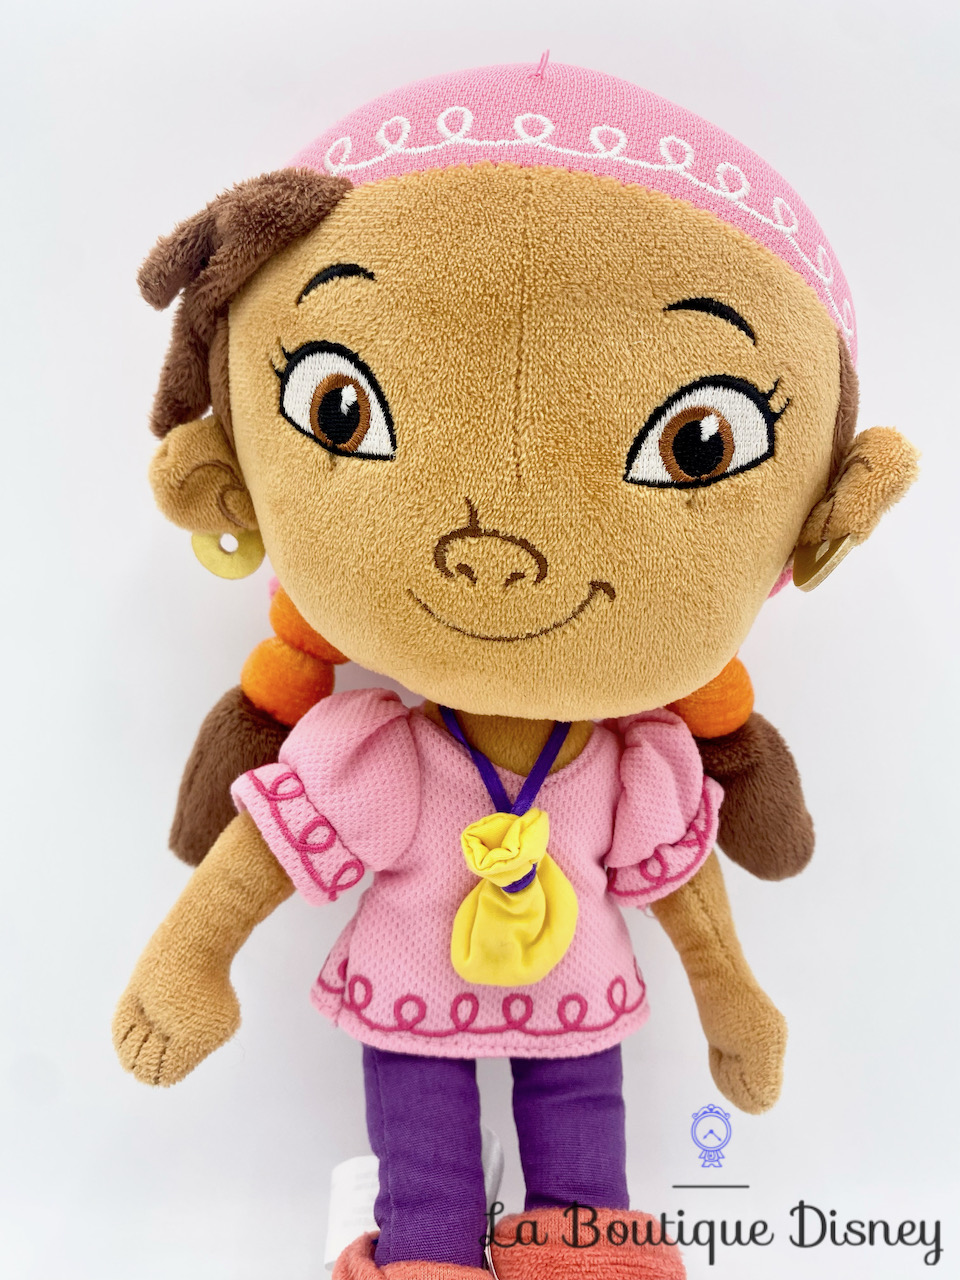 peluche-izzy-fille-pirate-disney-store-jake-pirates-pays-imaginaire-rose-2